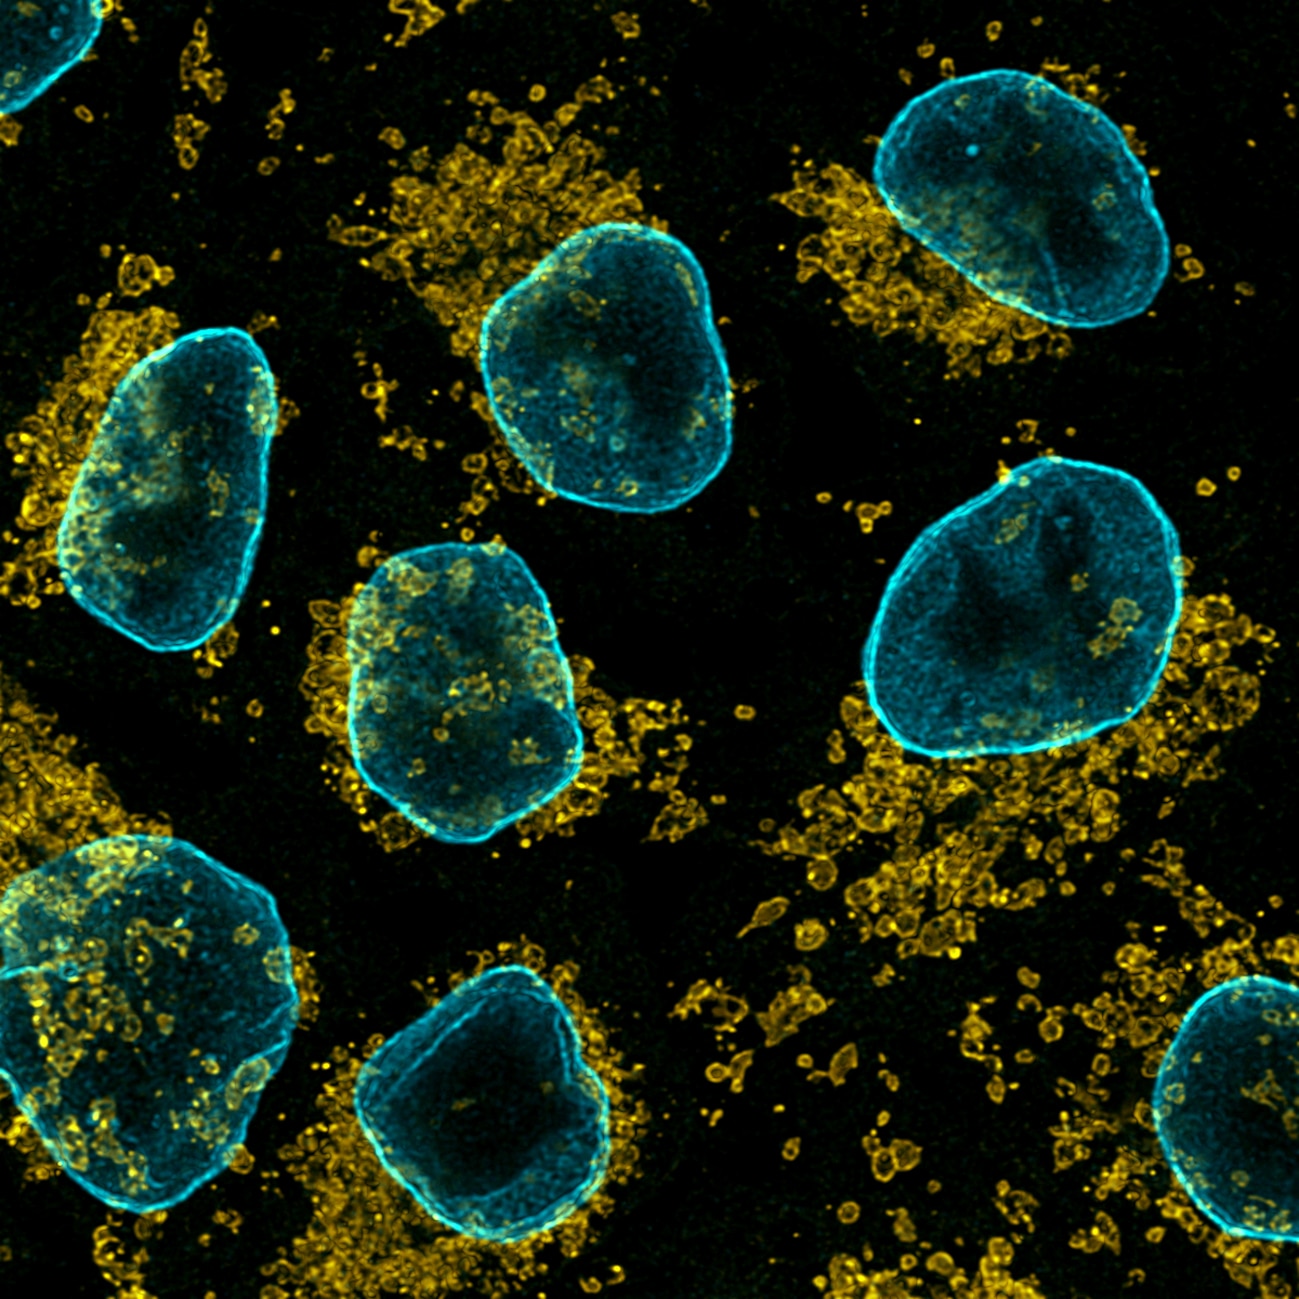 Immunofluorescence of HeLa: PFA-fixed HeLa cells were stained with anti-TOM20 antibody (11802-1-AP) labeled with FlexAble CoraLite® Plus 555 Kit (KFA002, yellow) and anti-Lamin B1 antibody (12987-1-AP) labeled with FlexAble CoraLite® Plus 647 Kit (KFA003, cyan). Confocal images were acquired with a 100x oil objective and post-processed. Images were recorded at the Core Facility Bioimaging at the Biomedical Center, LMU Munich.